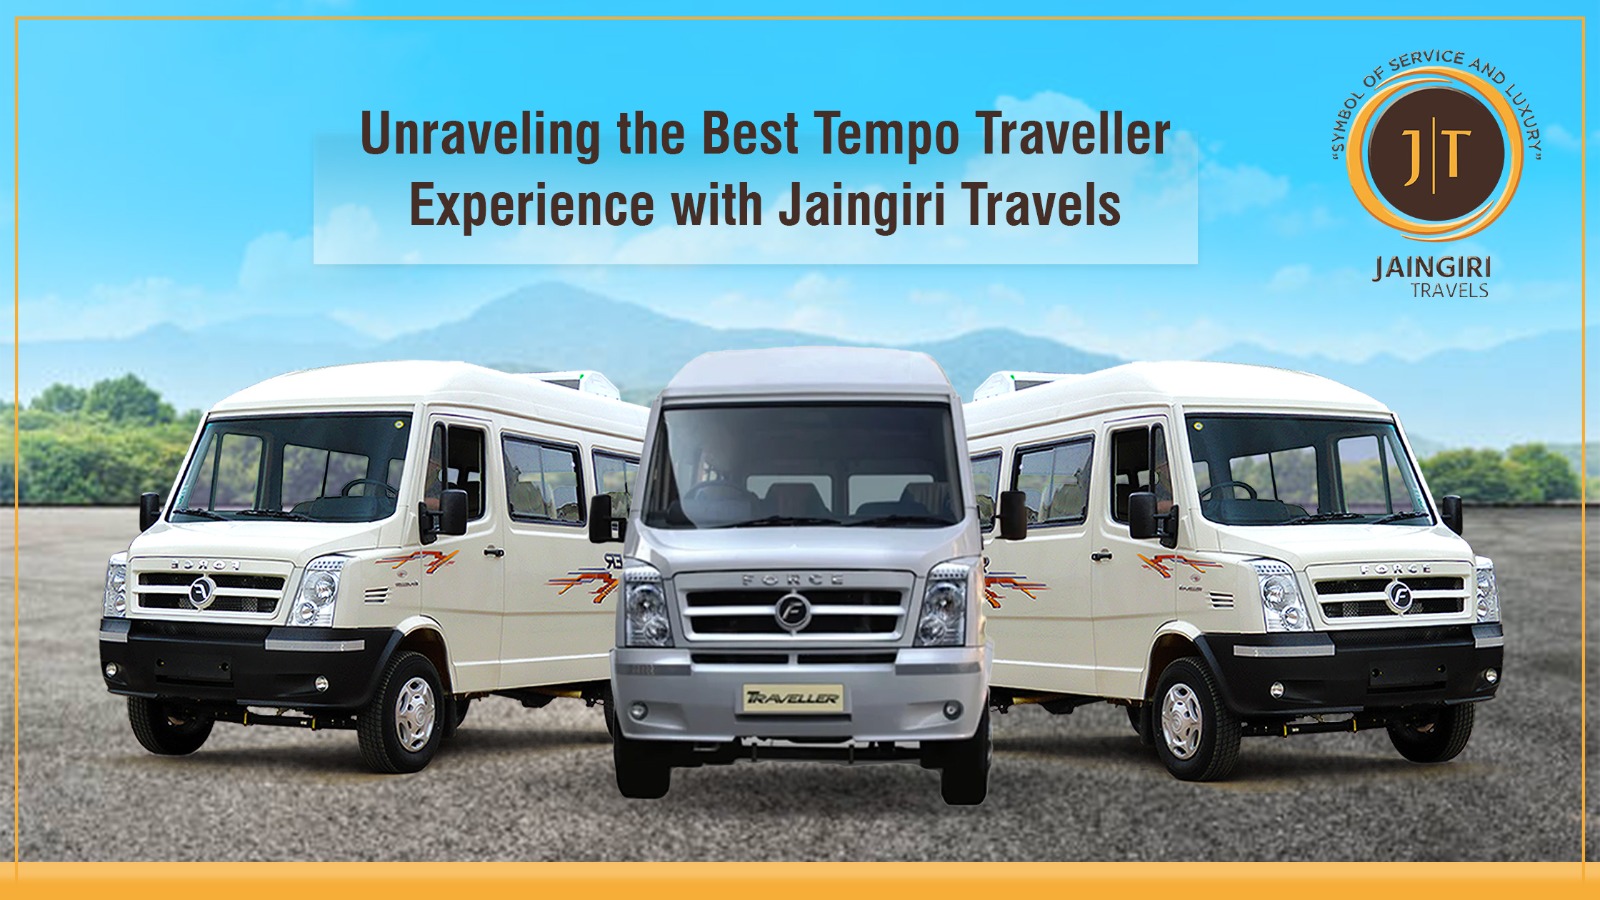 Unraveling the Best Tempo Traveller Experience with Jaingiri Travels